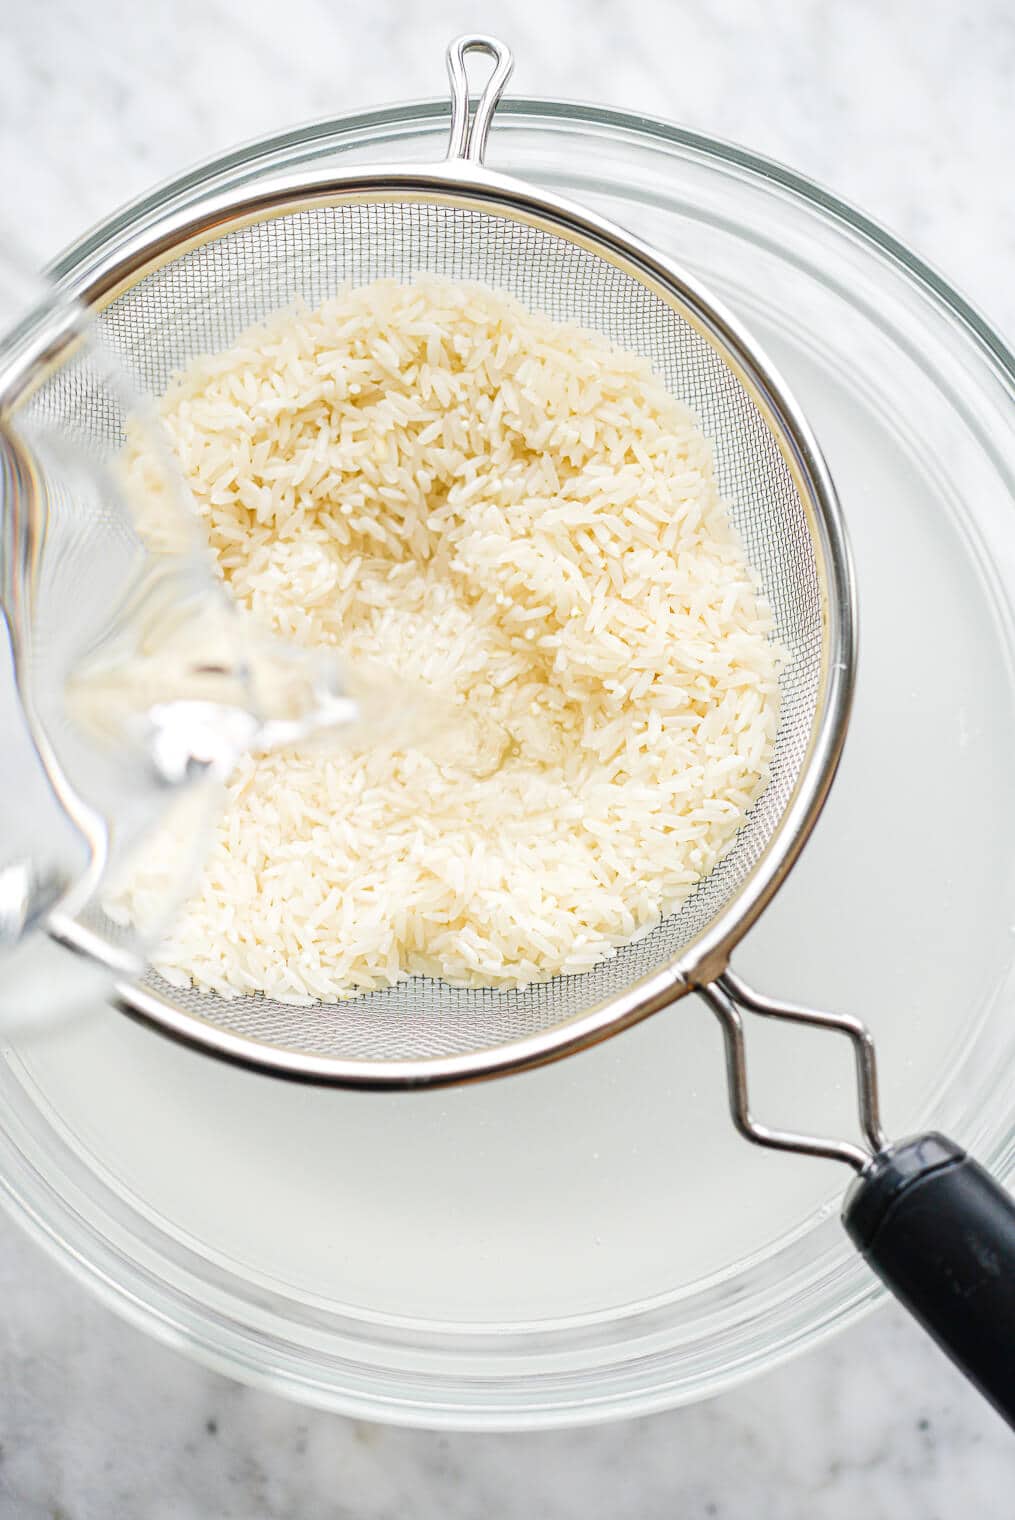 a fine mesh strainer of white rice being rinsed into a large glass bowl